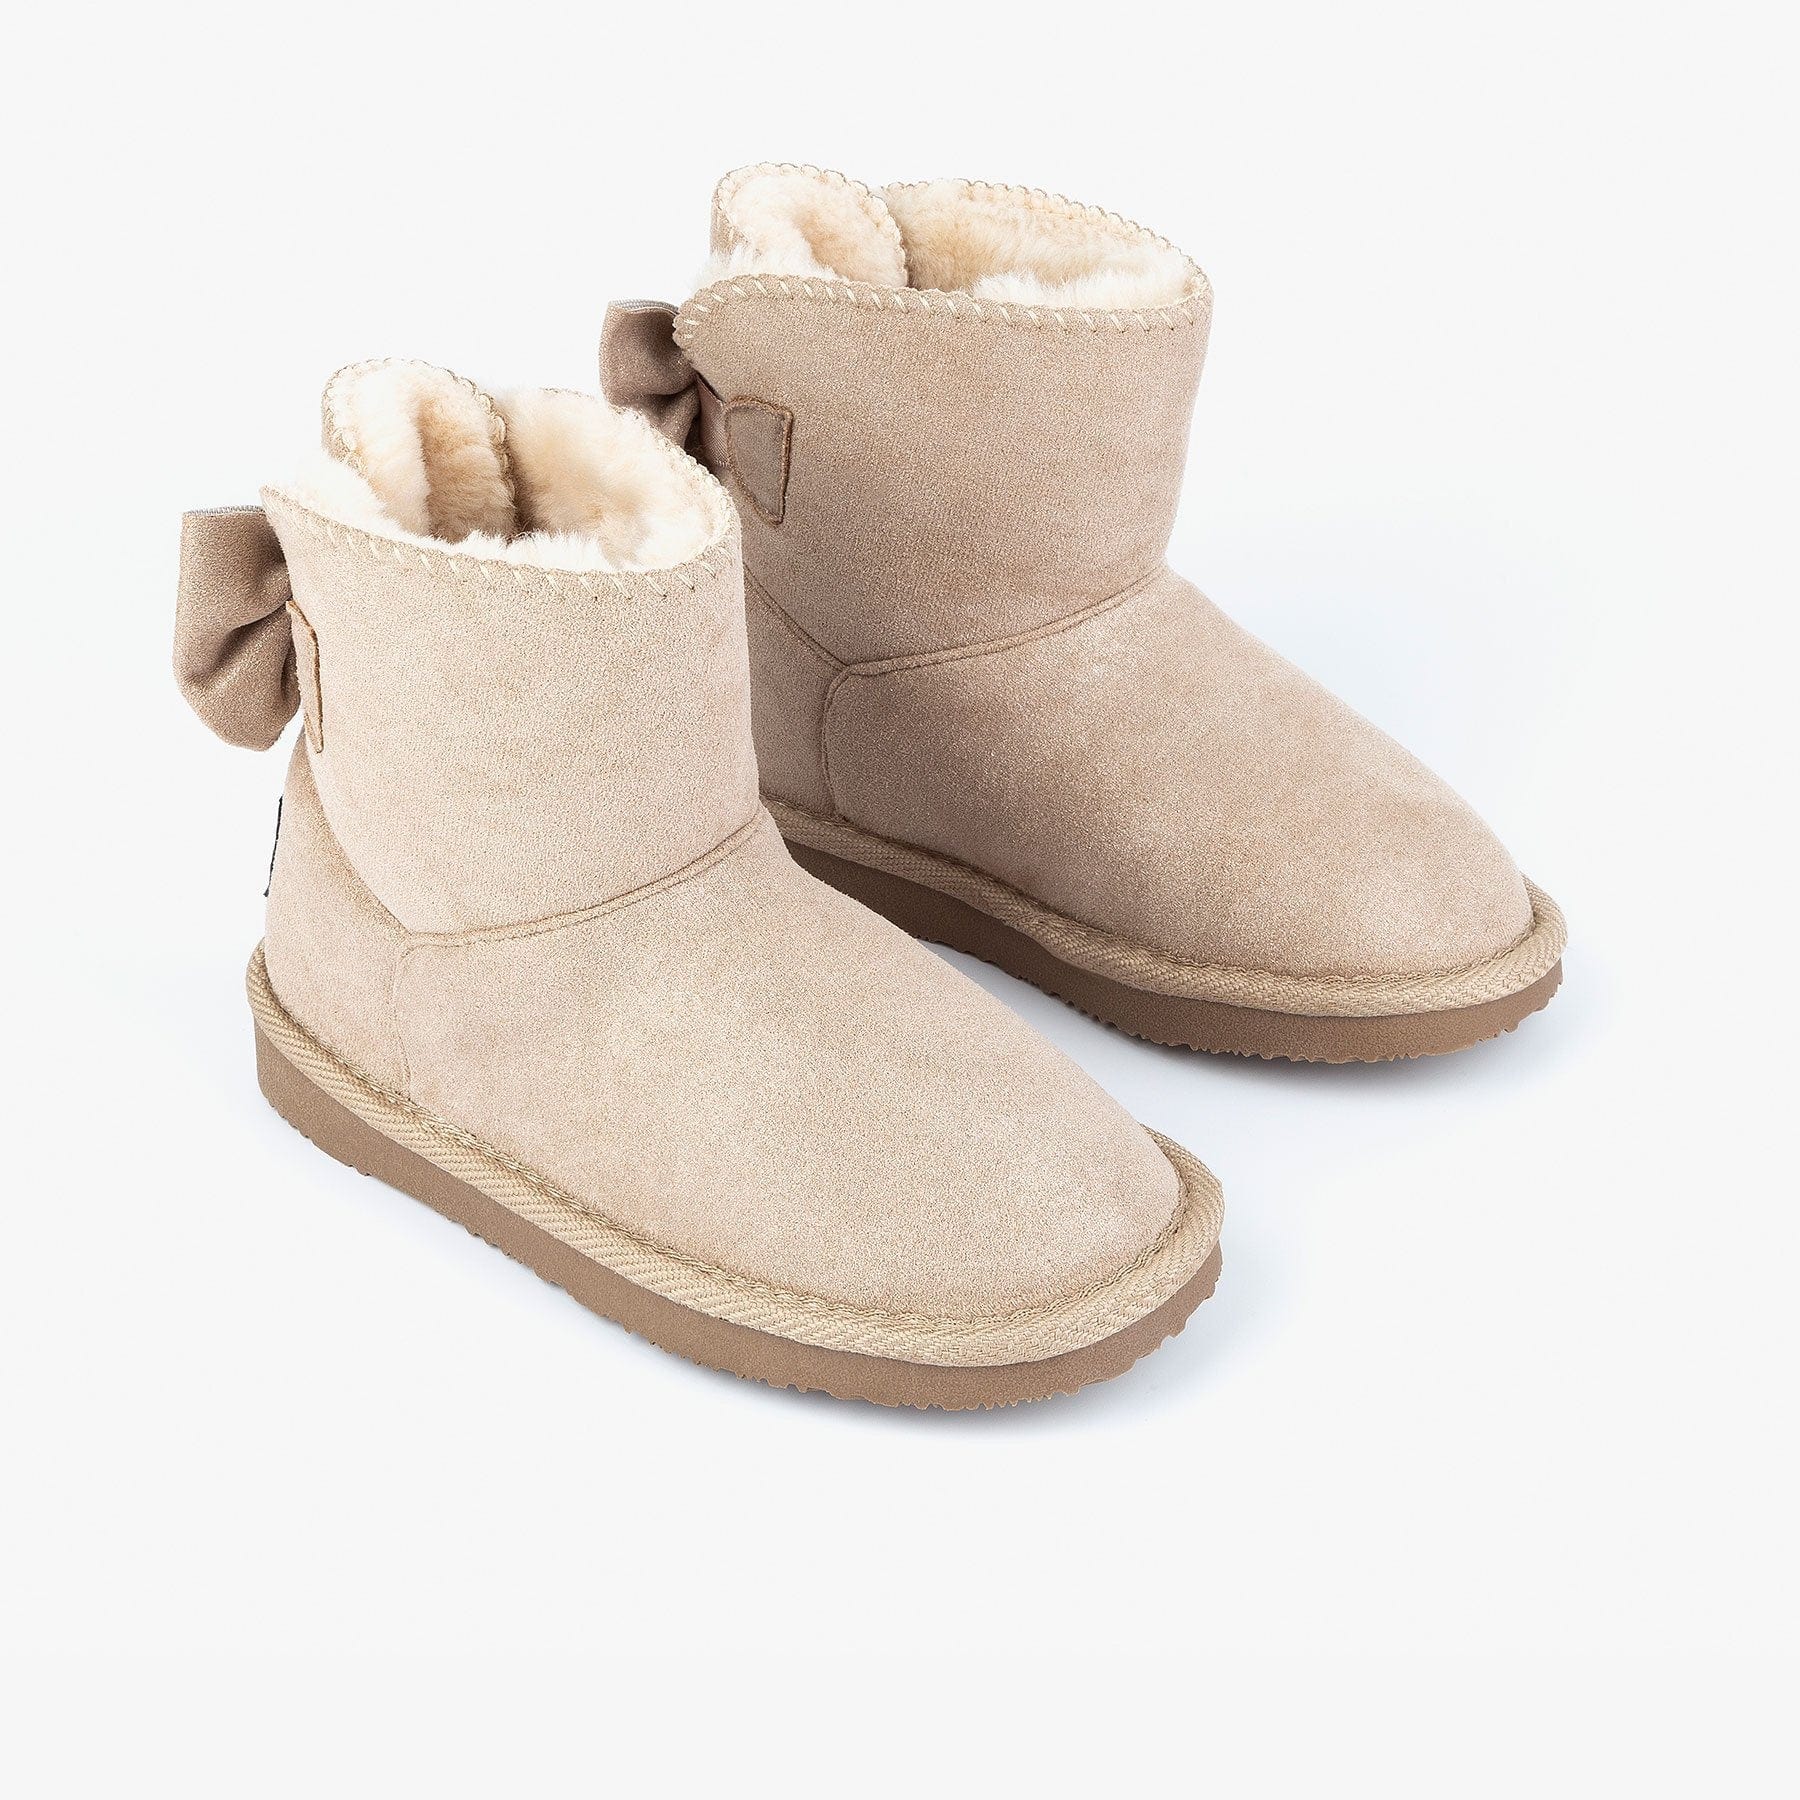 FRESAS CON NATA Shoes Girl's Taupe Australian Boots with Bow